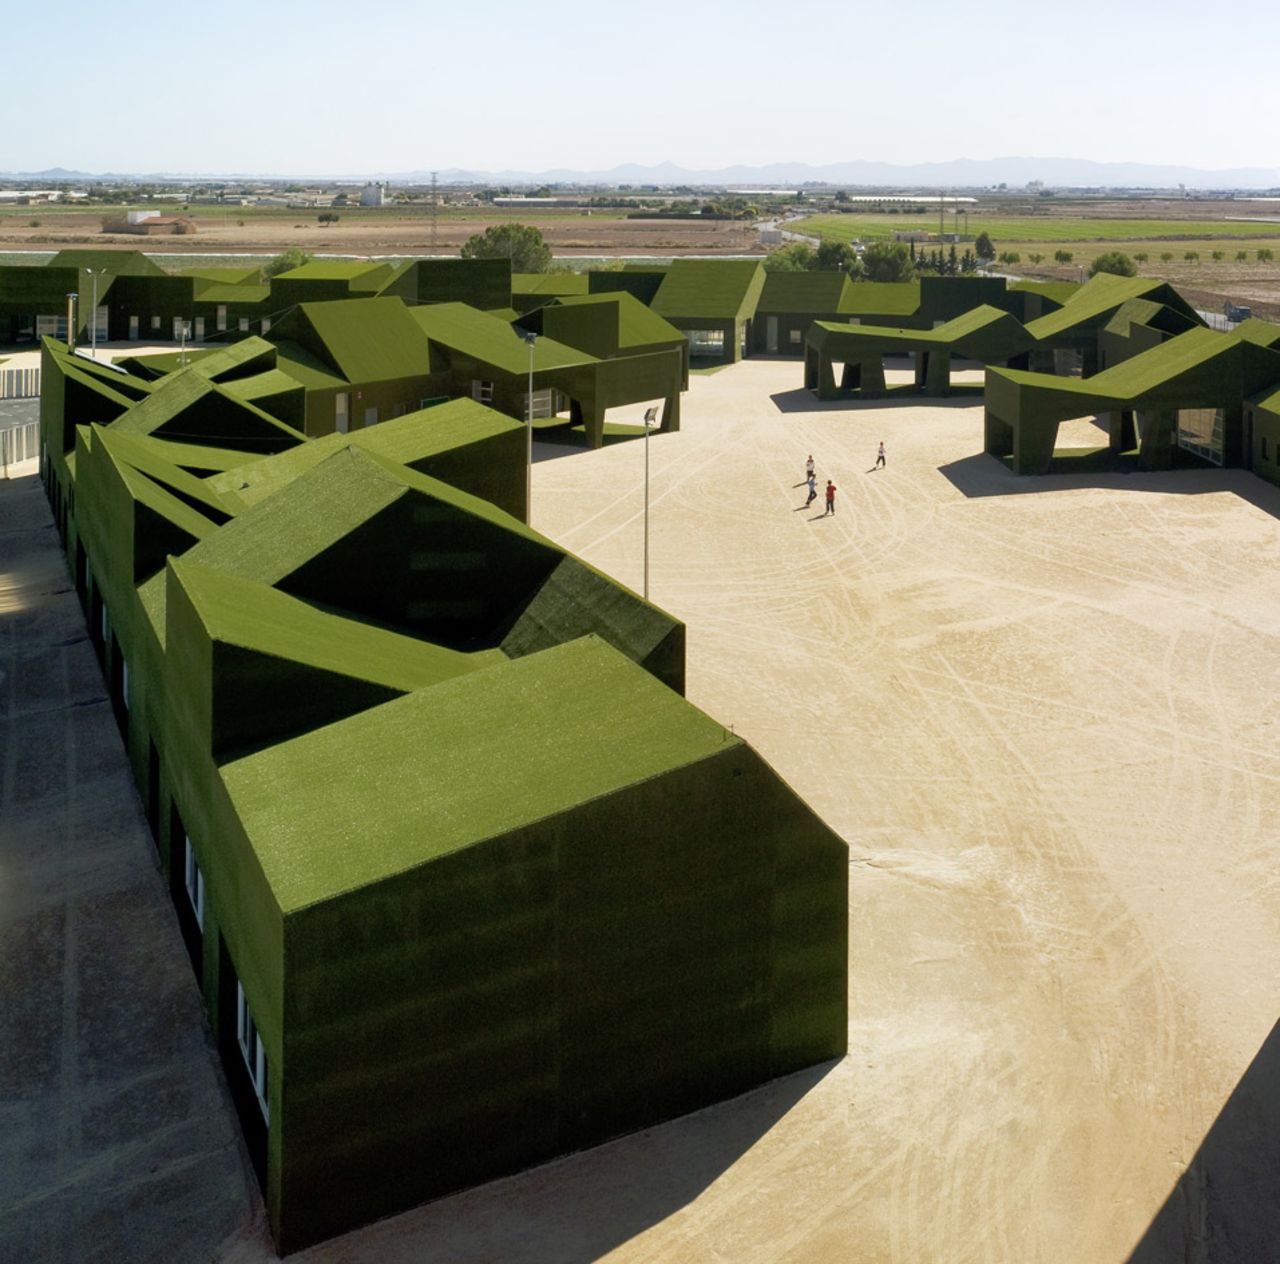 Located on the outskirts of this small town in Murcia, Spain, this school is fully wrapped in a green carpet of artificial turf, and is built on top of a two-meter high perimeter wall to protect it from the region's heavy rains. (Photo credit: David Frutos)